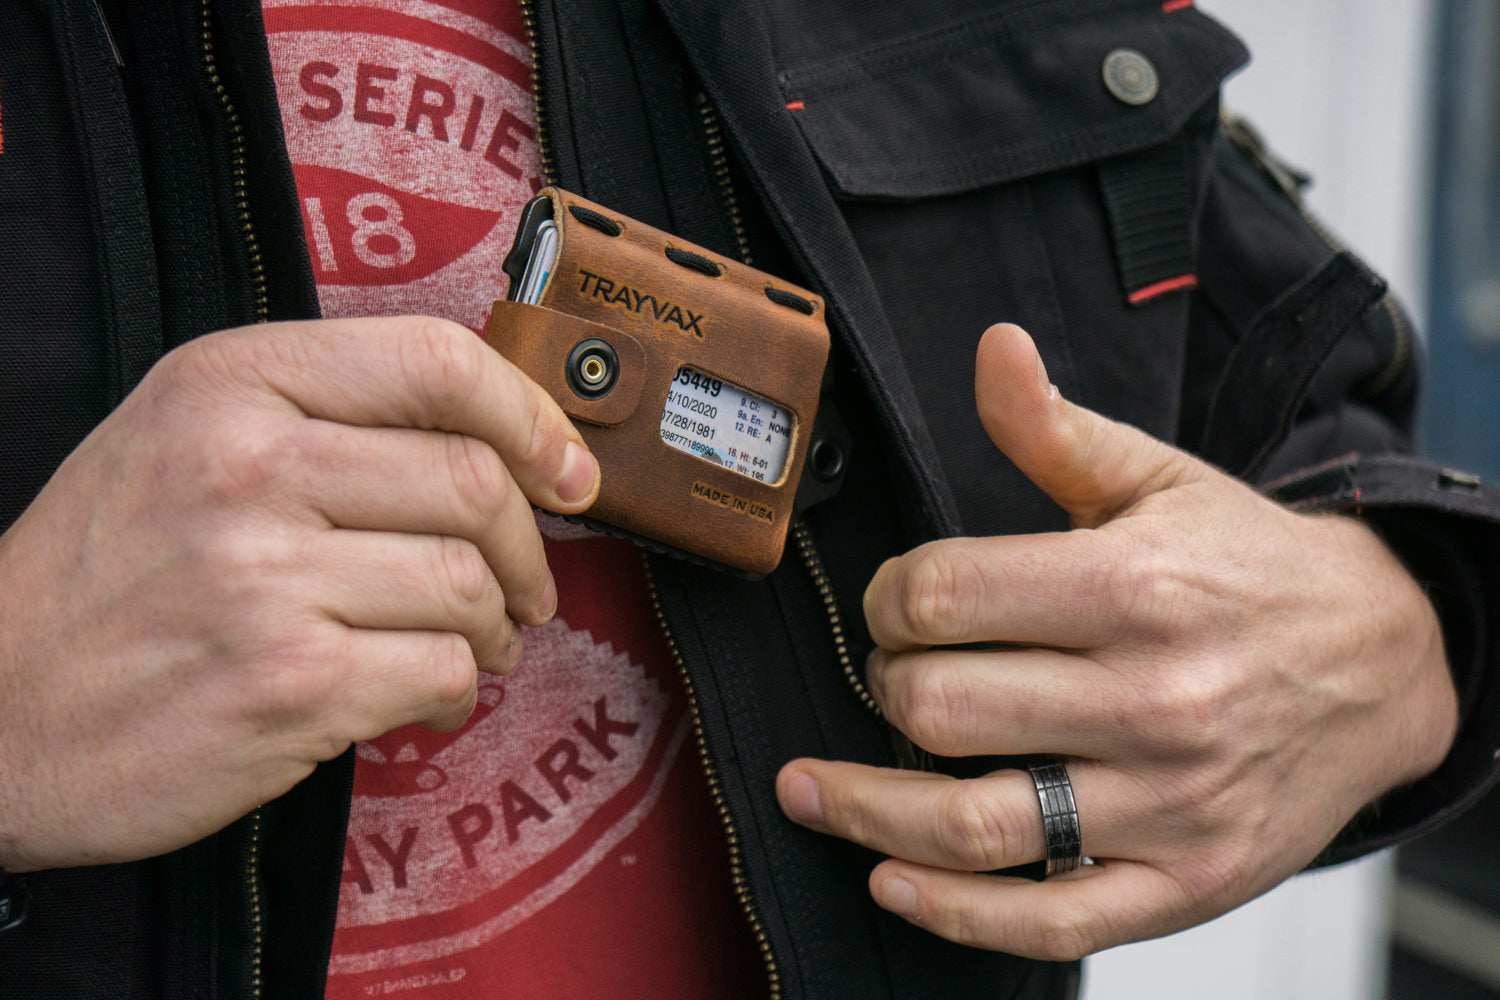 Tobacco Brown Top Grain Leather Wallet With Guy placing it in Jacket Pocket